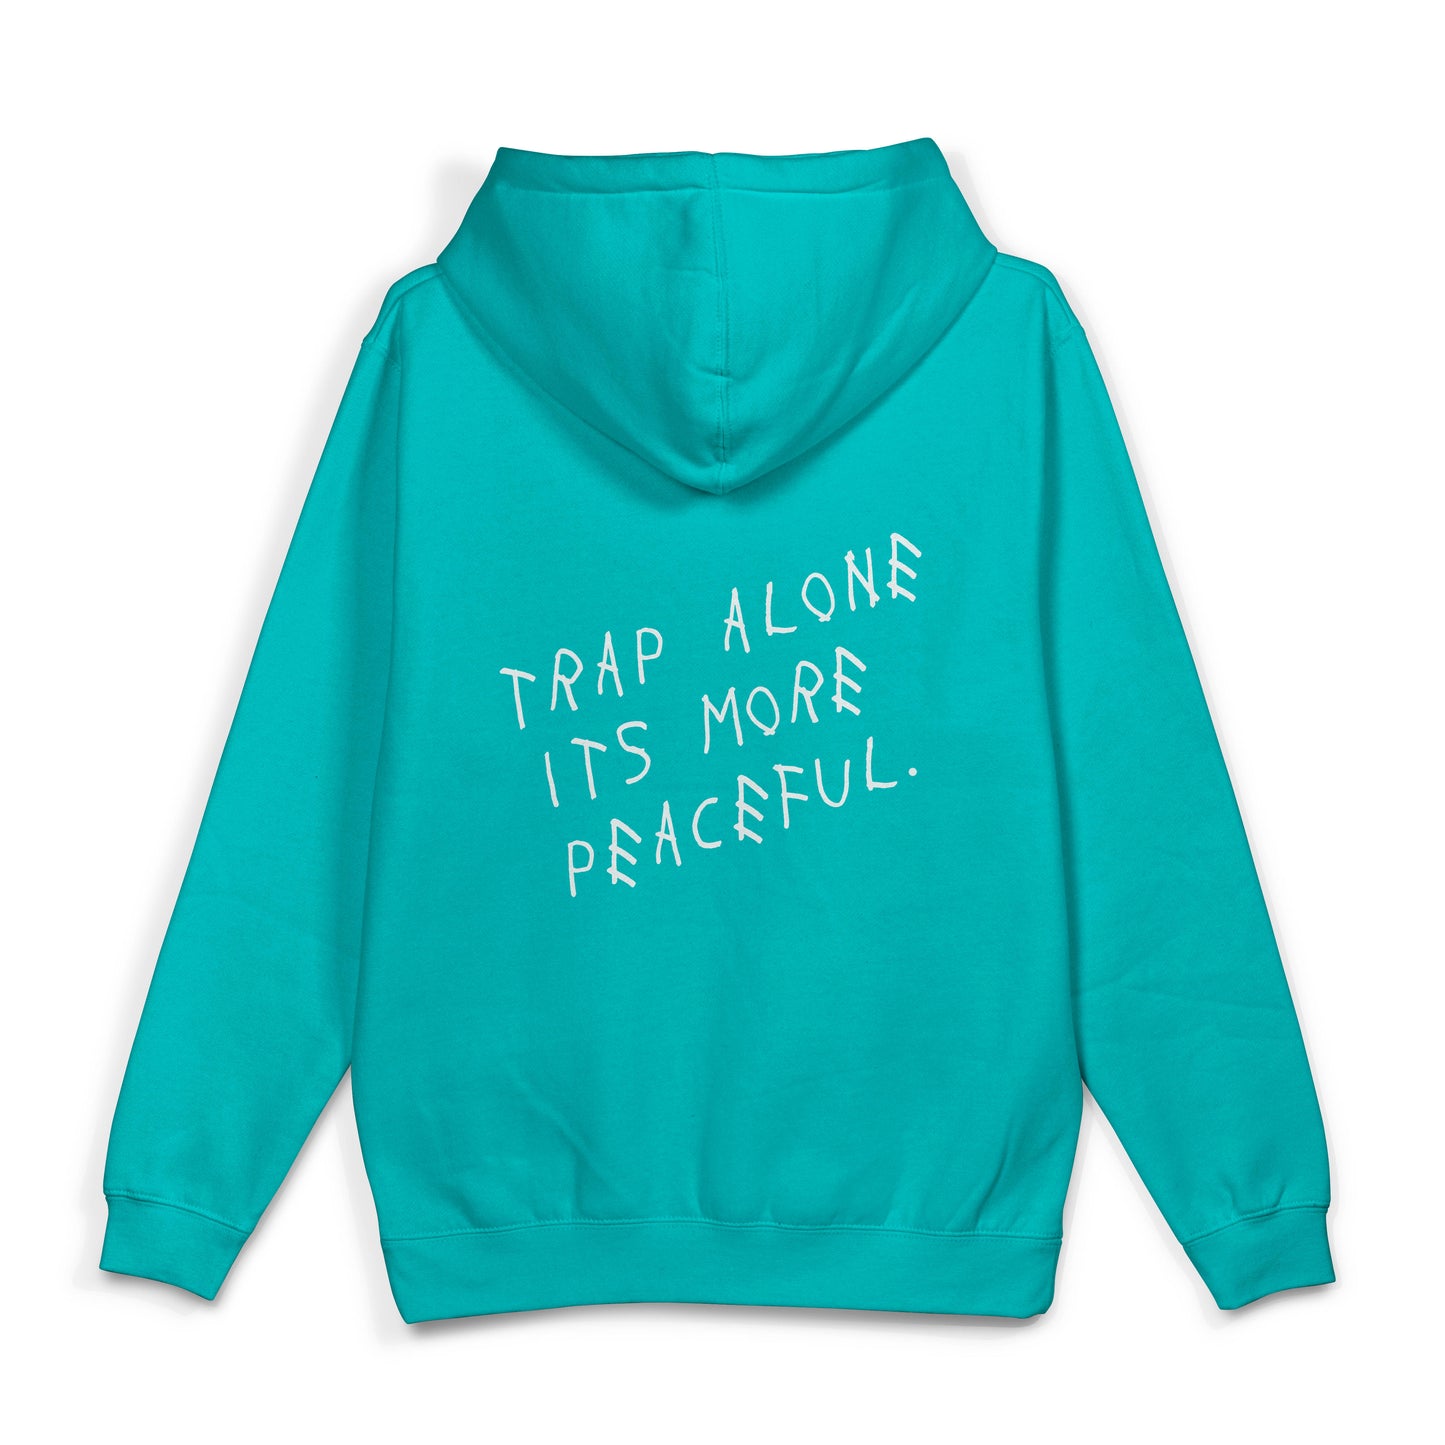 Trap In Peace "Classic Print" Hoodie (Teal)